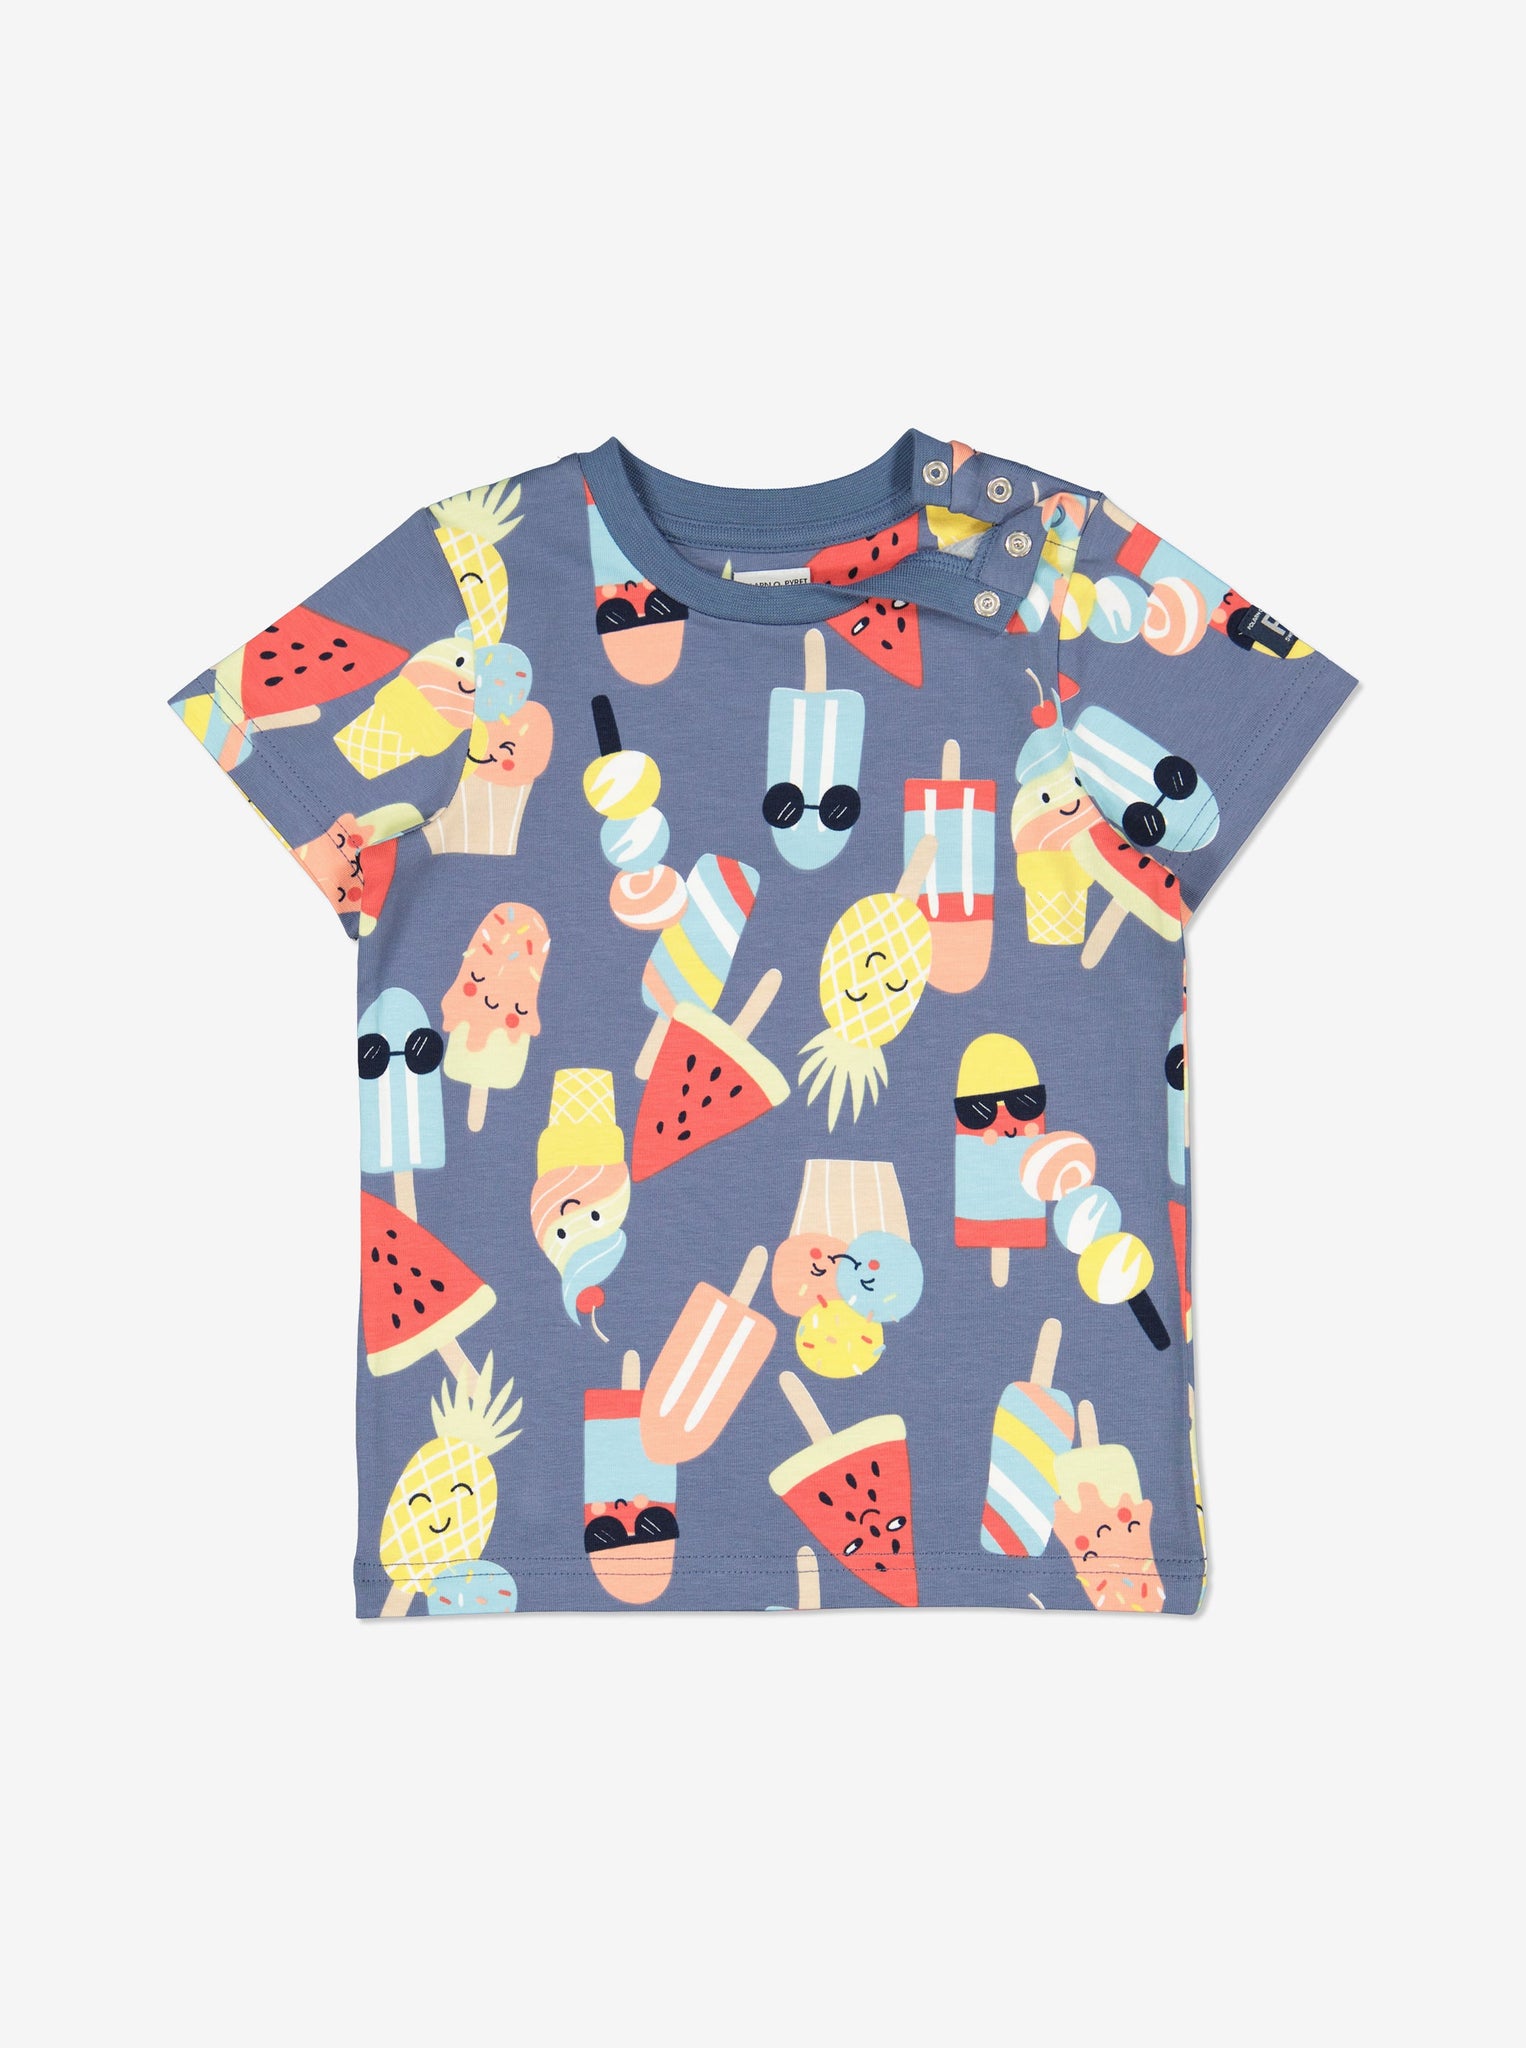 Ice Cream Print Navy Kids T-Shirt from Polarn O. Pyret Kidswear. Made using sustainable sourced materials.